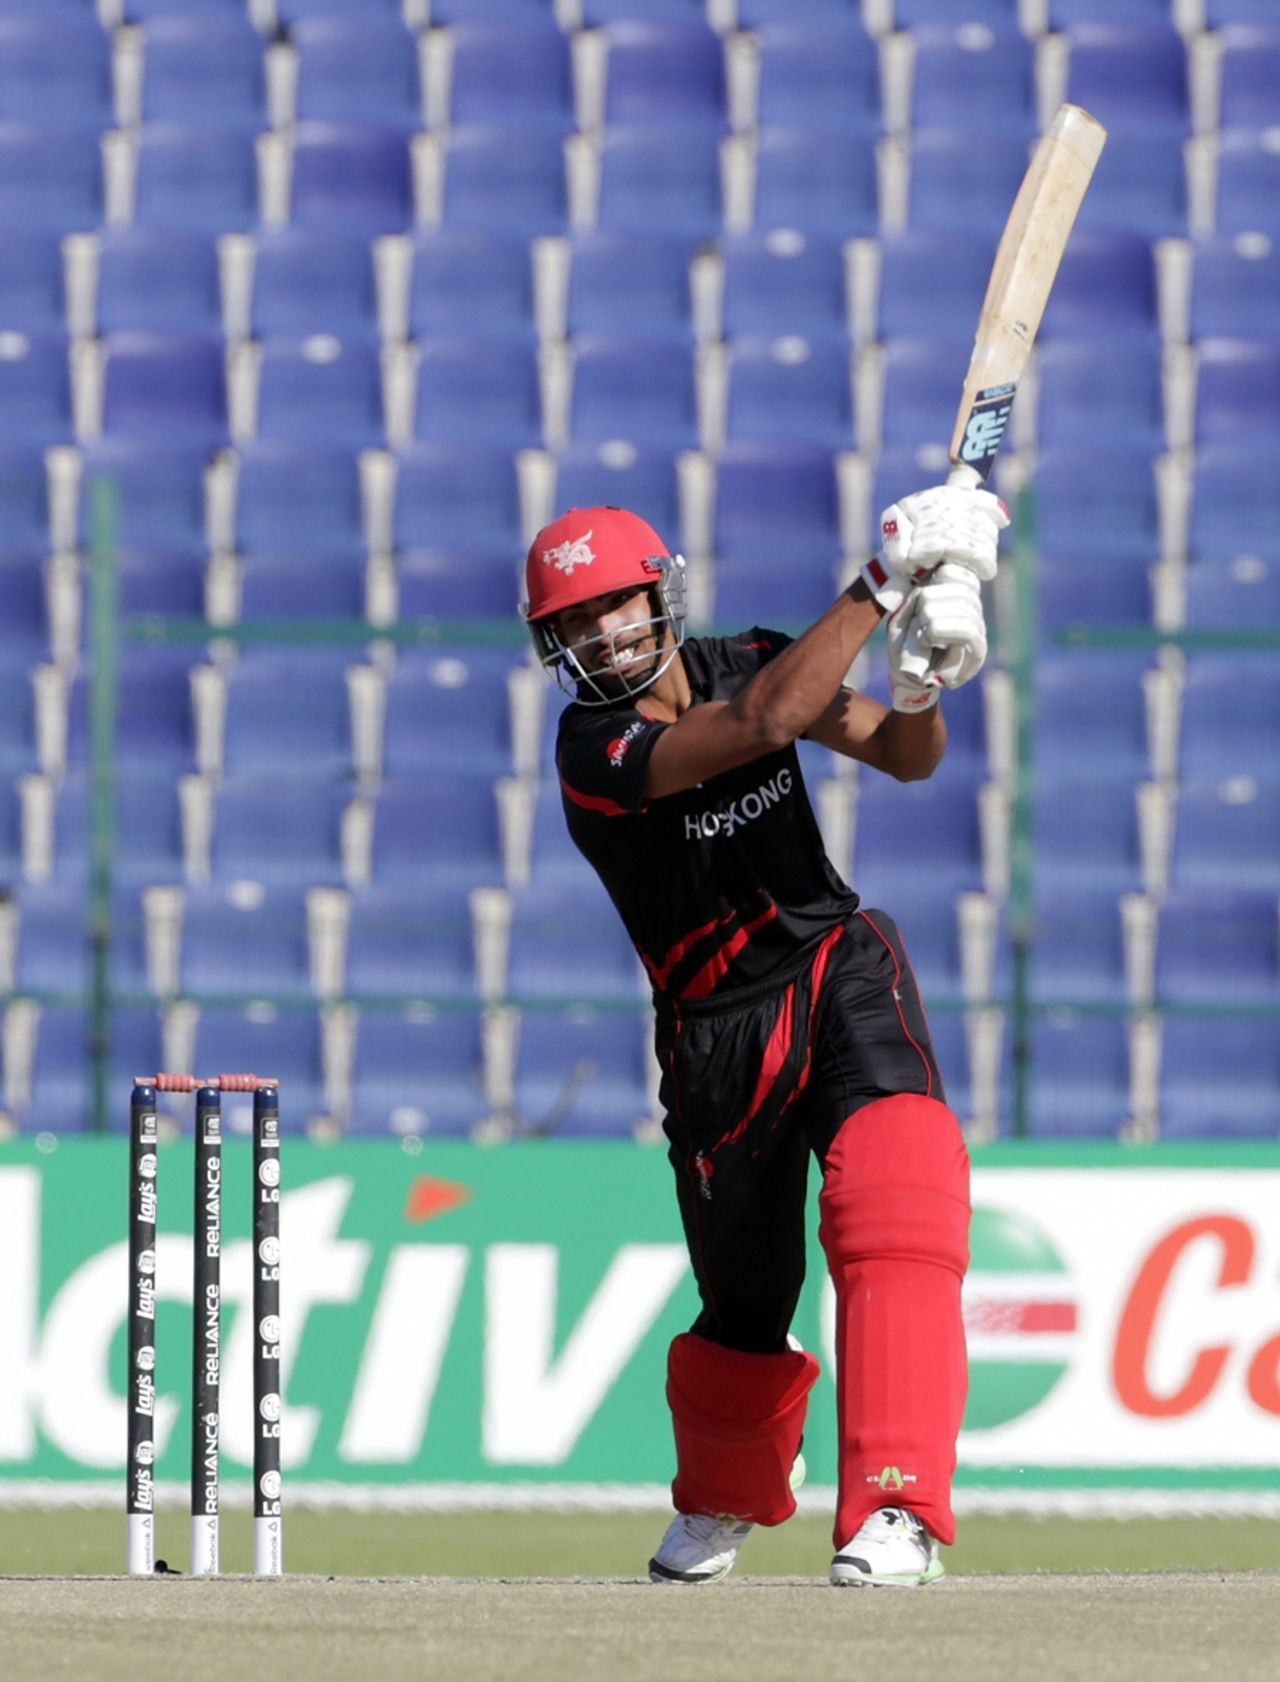 Irfan Ahmed batting during the Papua New Guinea v Hong Kong Qualifying Play-off match at the ICC World Twenty20 Qualifiers at the Zayed Cricket Stadium on November 28, 2013 in Abu Dhabi, United Arab Emirates. (Photo by Graham Crouch-IDI/IDI via Getty Images)